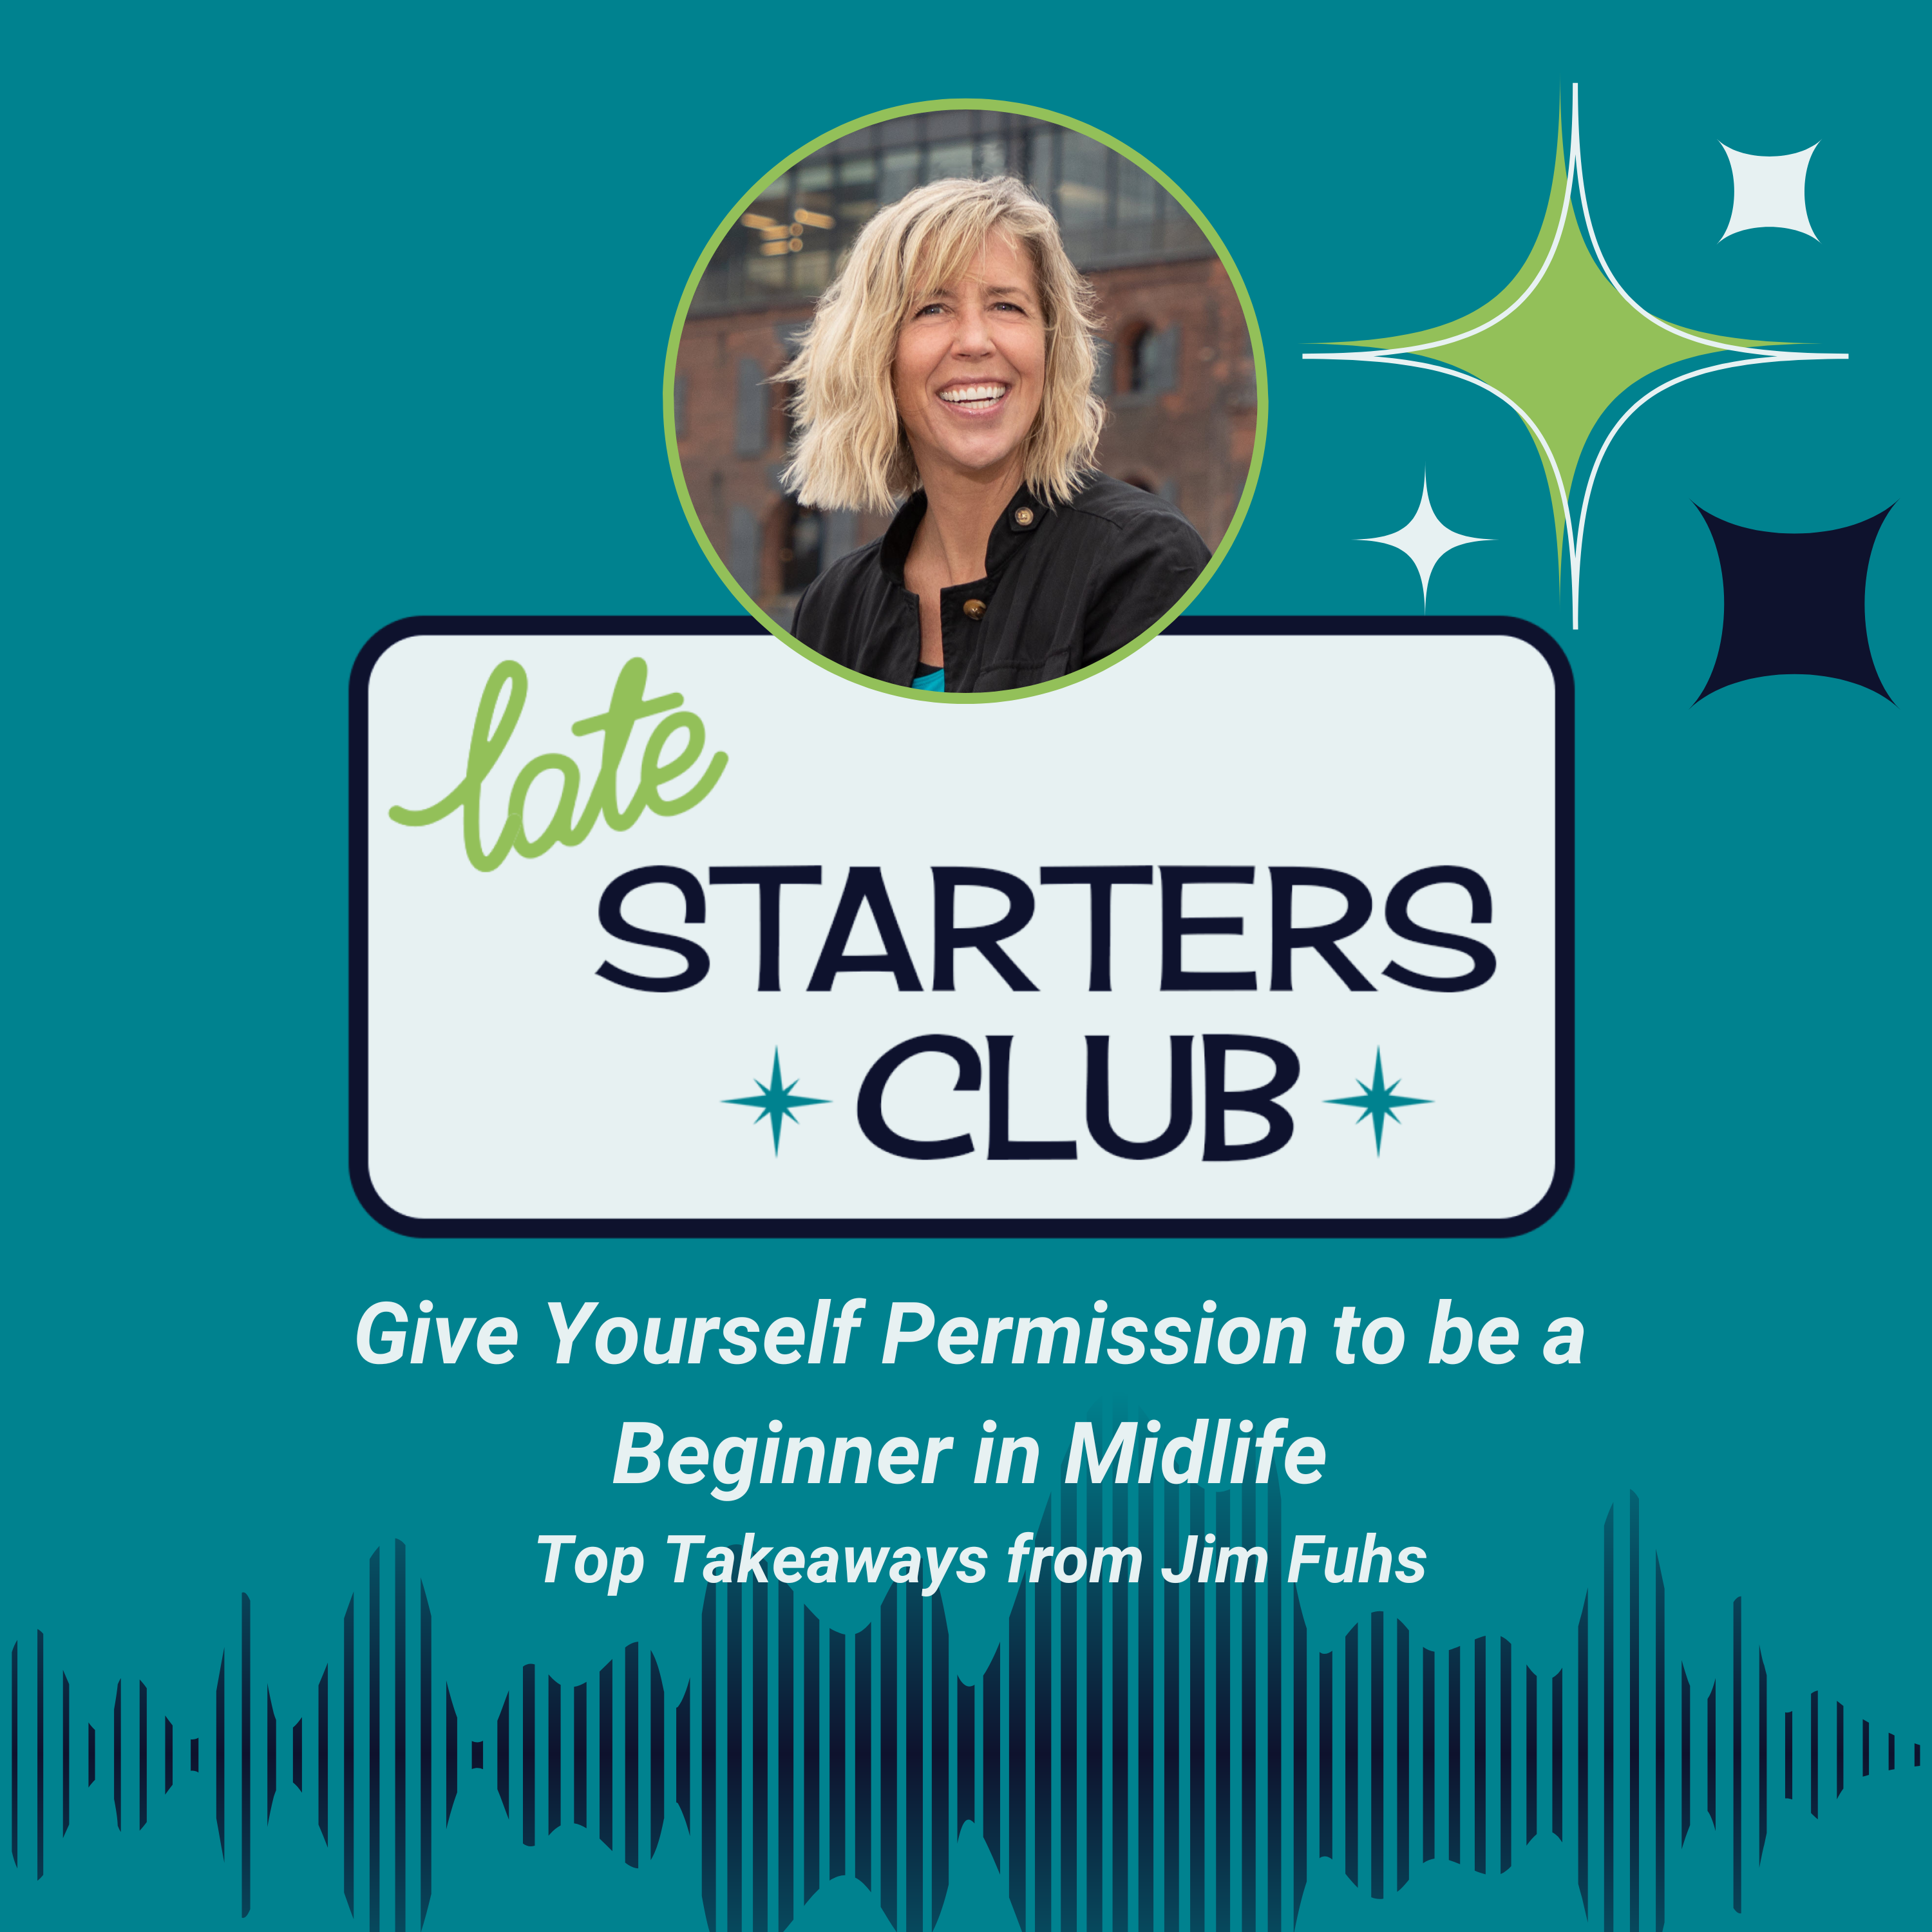 44: Give Yourself Permission to Be a Beginner in Midlife – Top Takeaways from Jim Fuhs